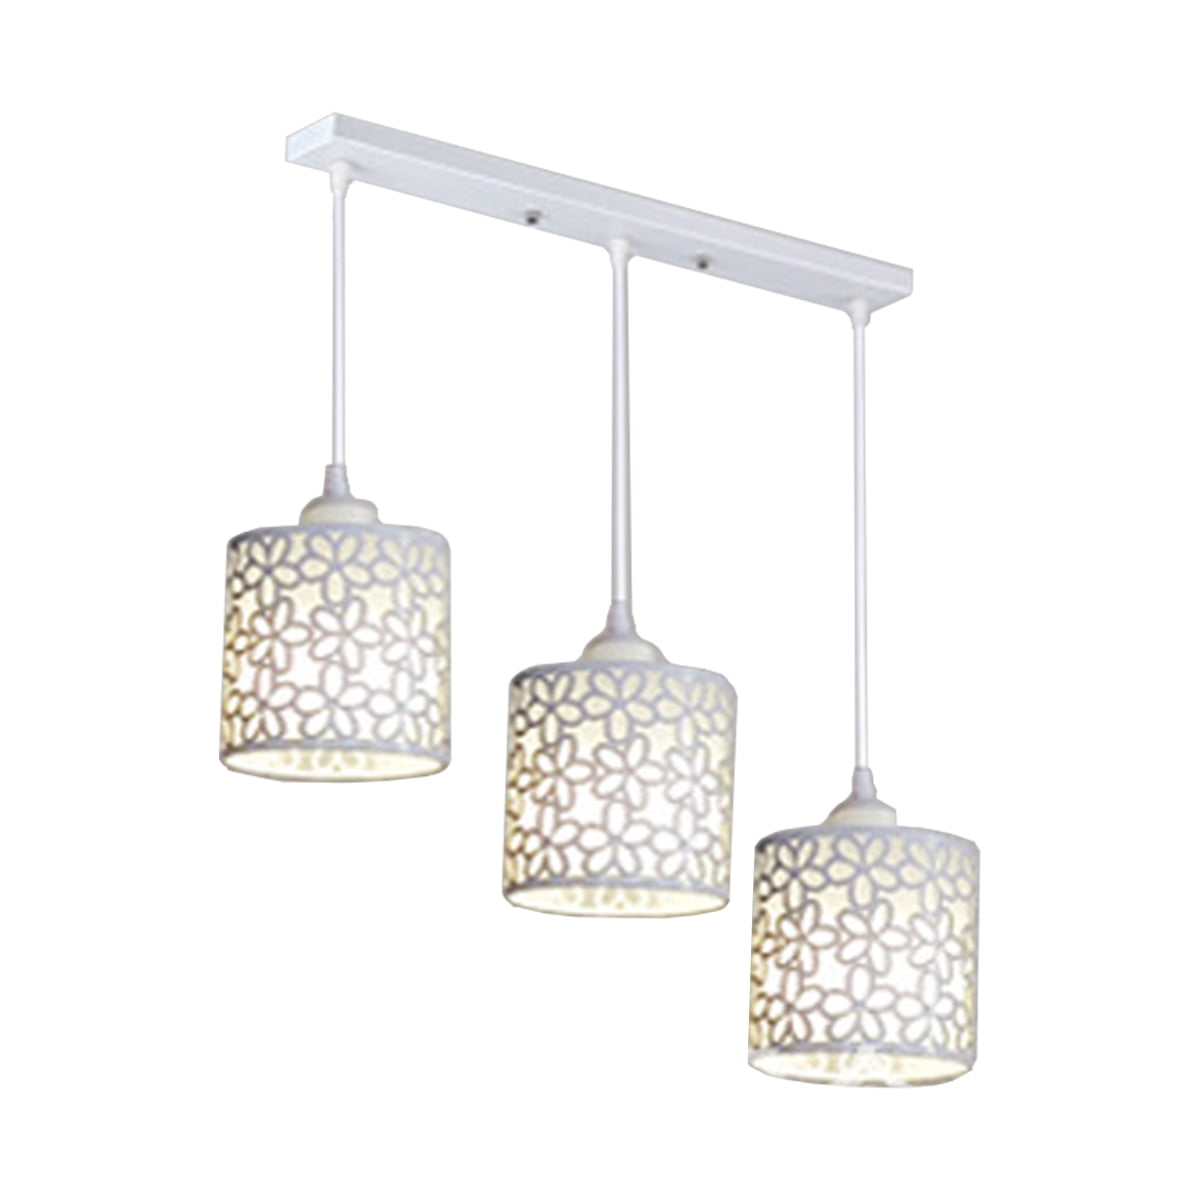 Ceiling Lamp Vintage Hollow Out, Rectangular Metal And Glass 3 Light Chandelier